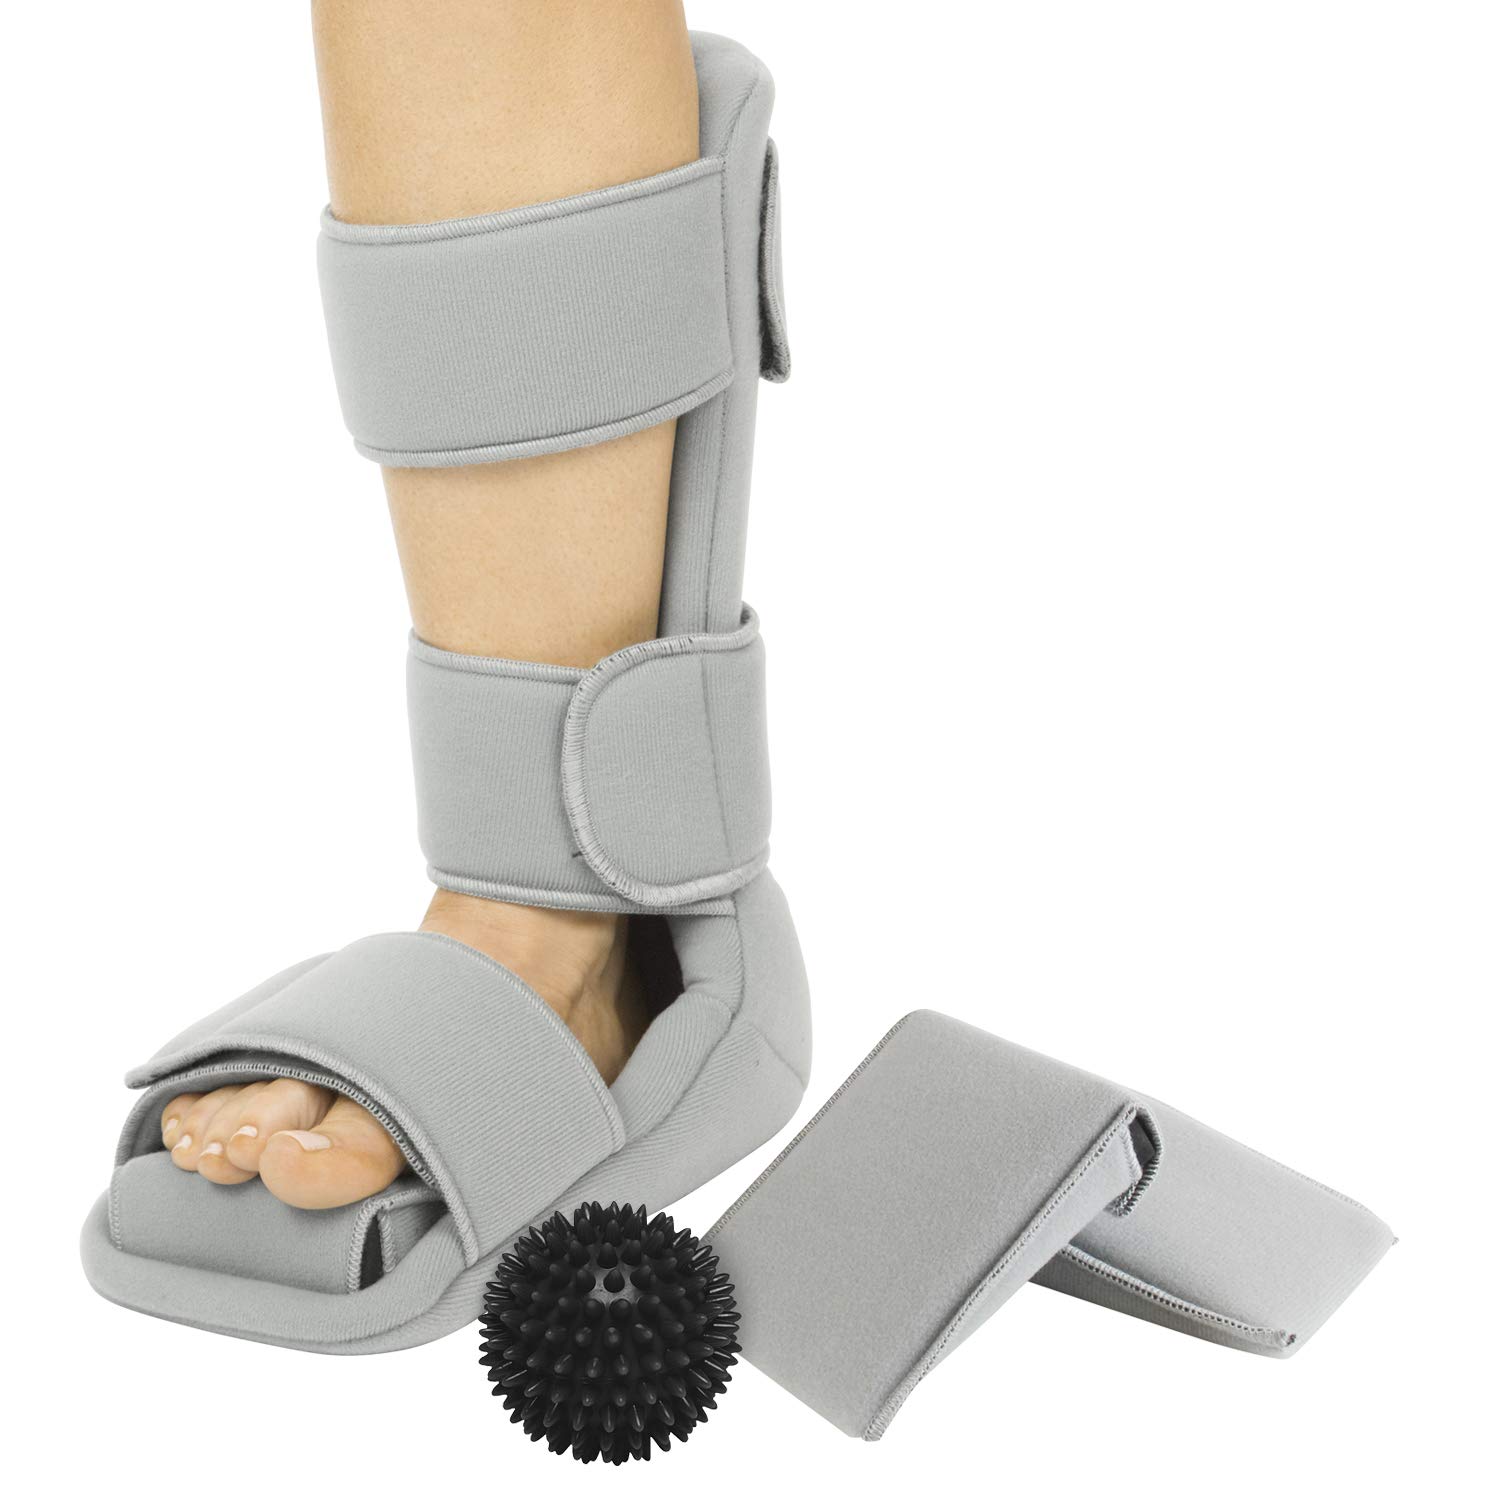 Vive Plantar Fasciitis Night Splint Plus Trigger Point Spike Ball - Soft  Leg Brace Support Orthopedic Sleeping Immobilizer Stretch Boot (Large:  Mens: 8.5 - 11 Womens: 10 - 12) Gray Large (Pack of 1)